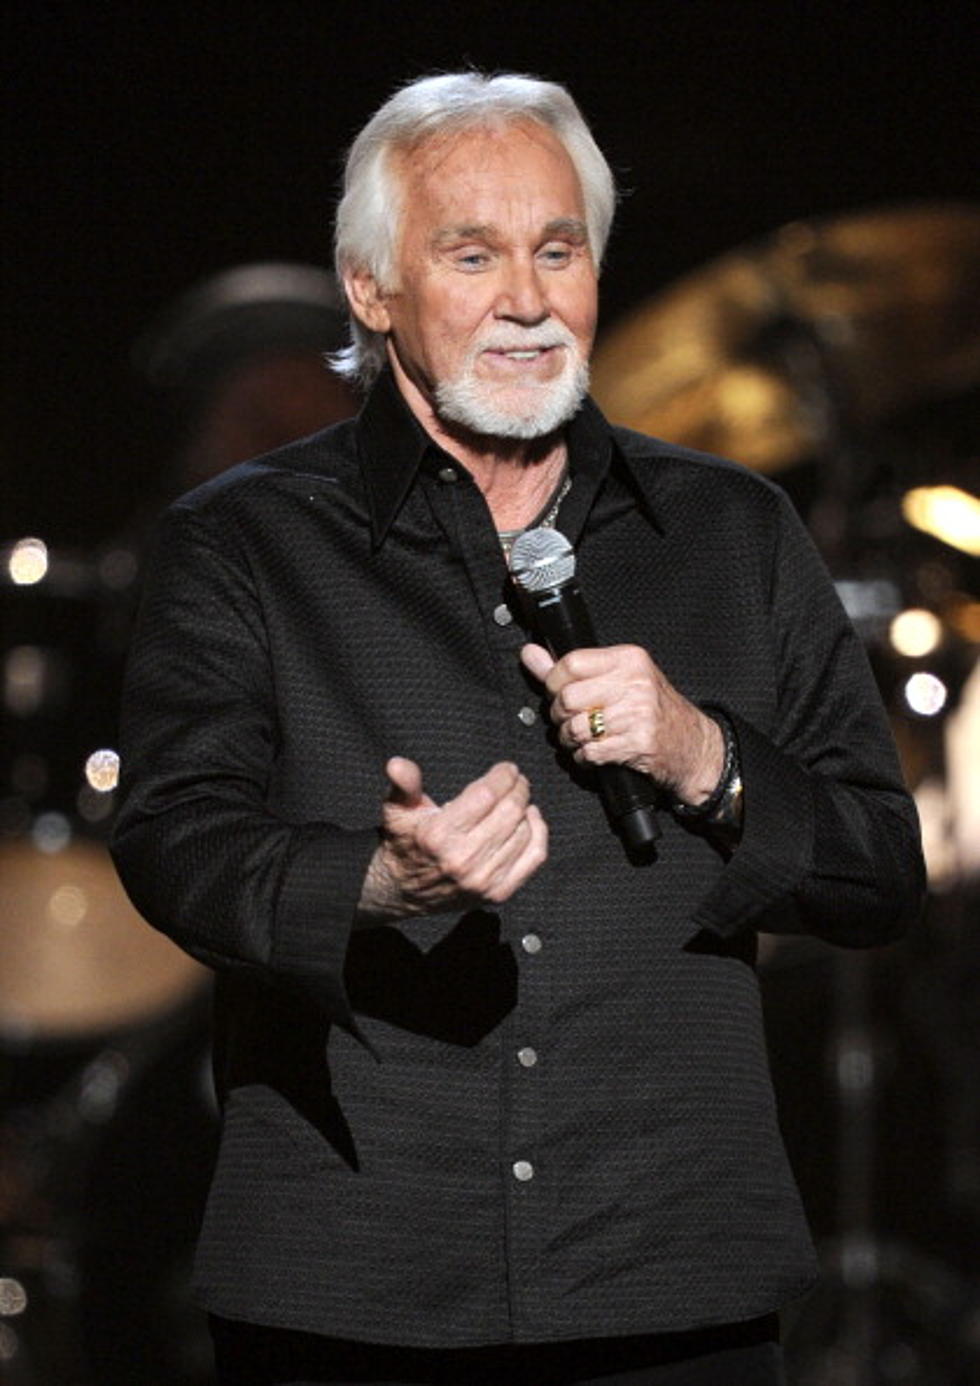 Kenny Rogers Tickets To Be Auctioned For American Lung Association